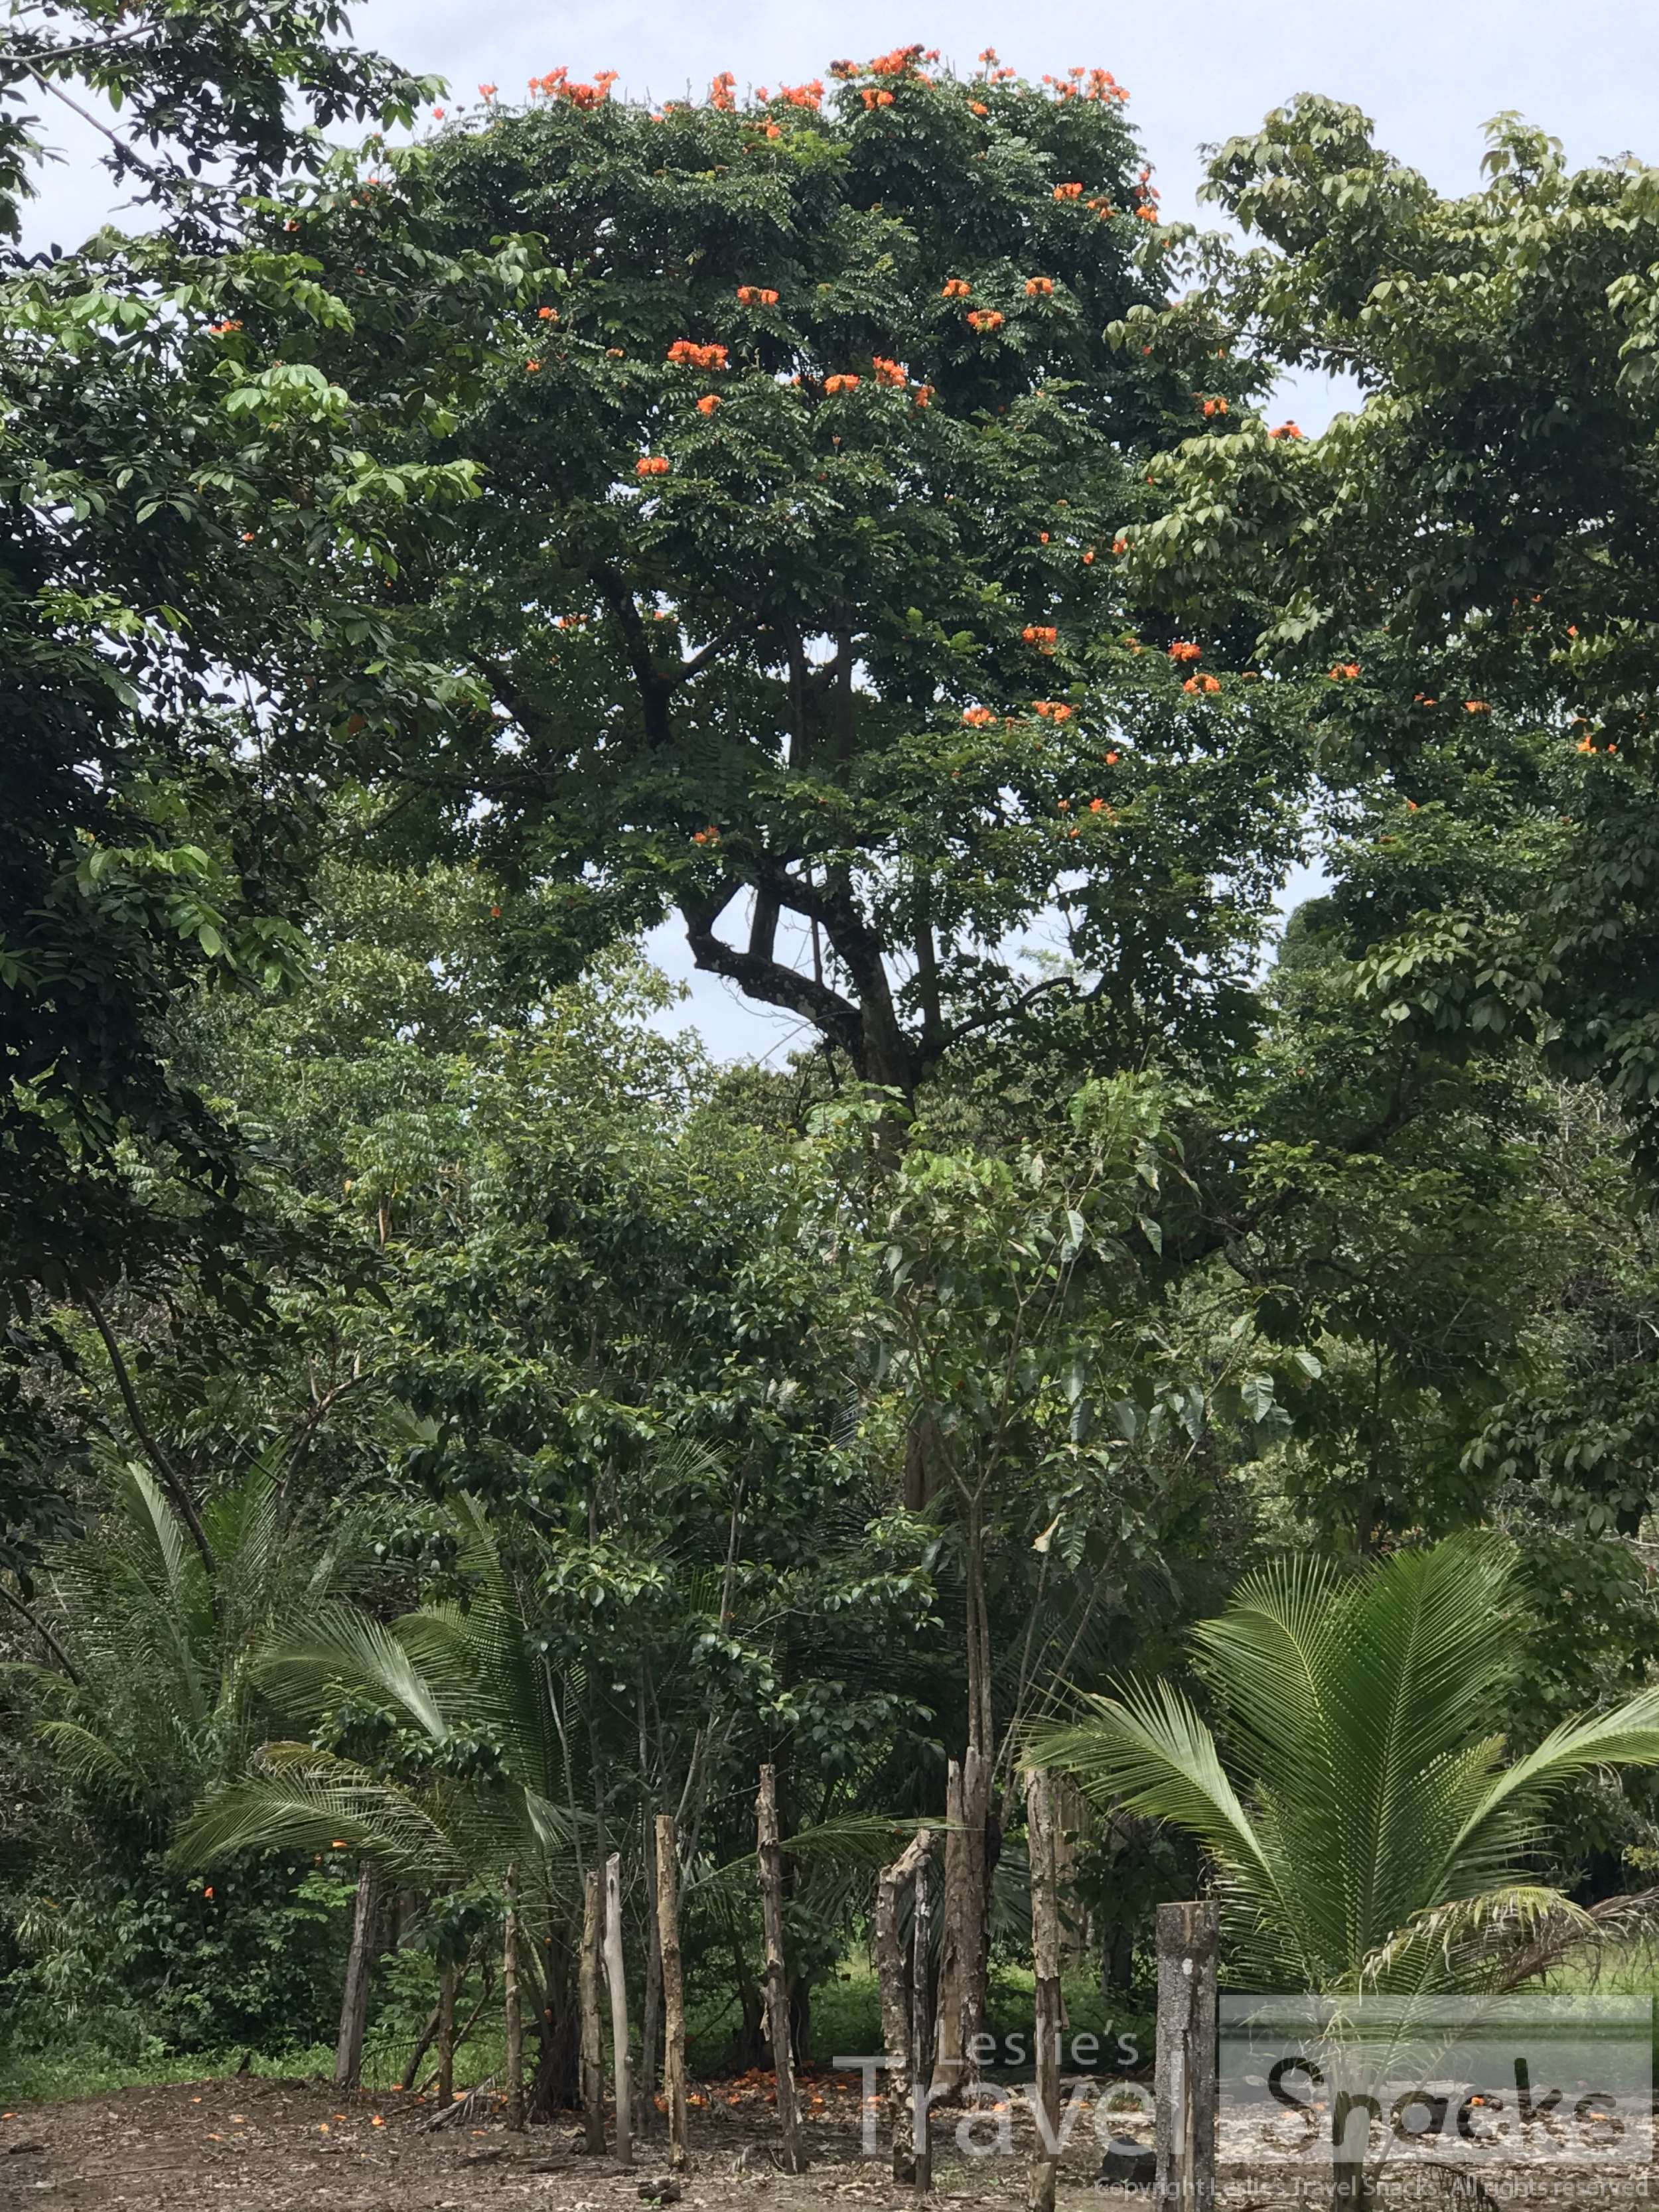 Large bright orange flowers high up in the tree.